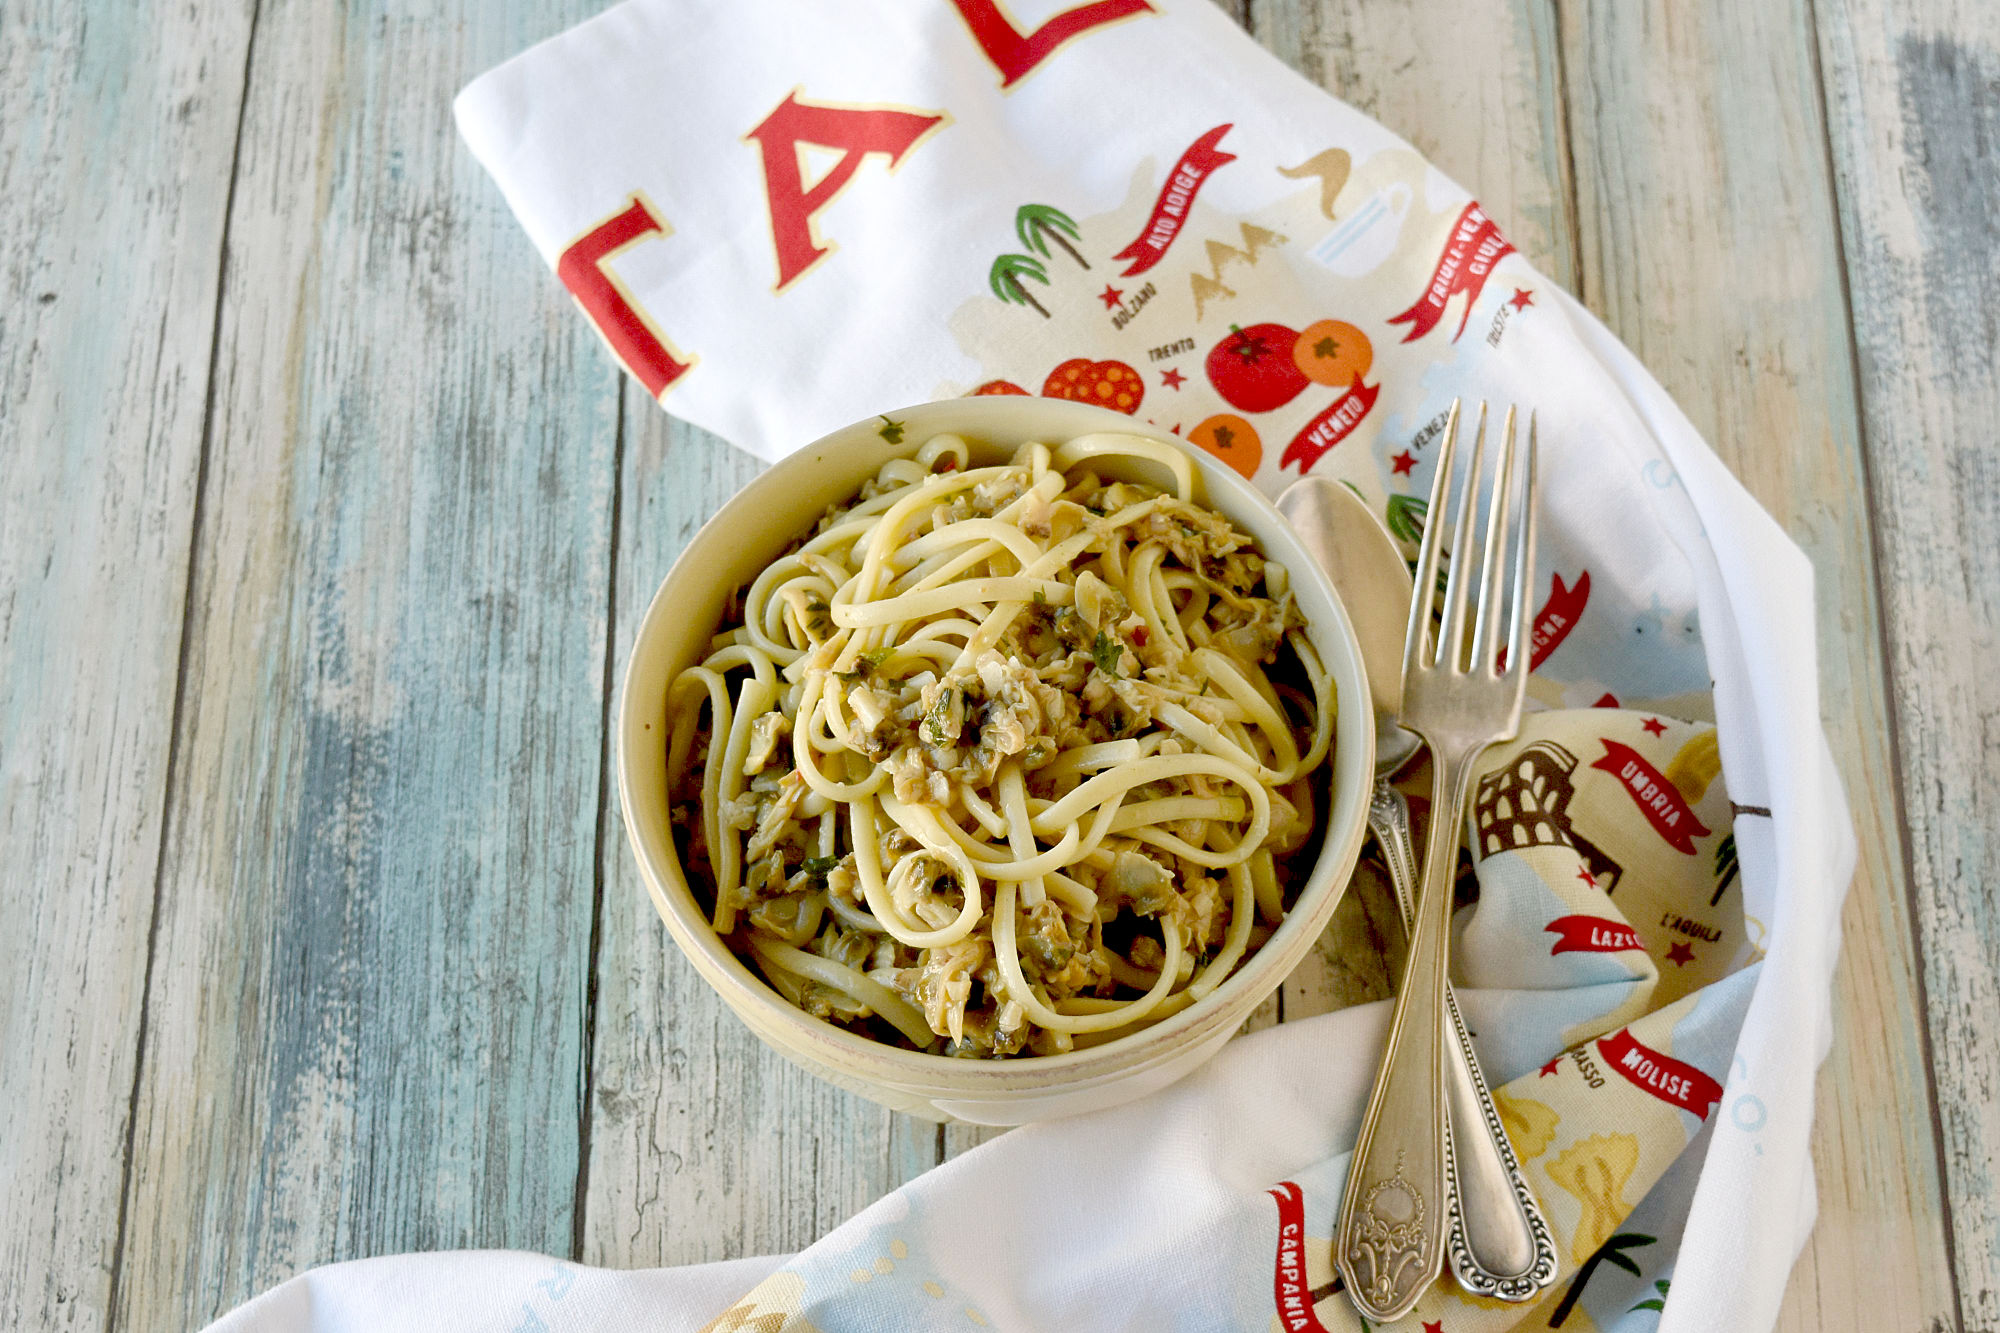 Easy Linguine with Clam Sauce uses pantry ingredients and comes together in a snap! It’s perfect for those busy weeknights and even fancy enough for a date dinner! #OurFamilyTable